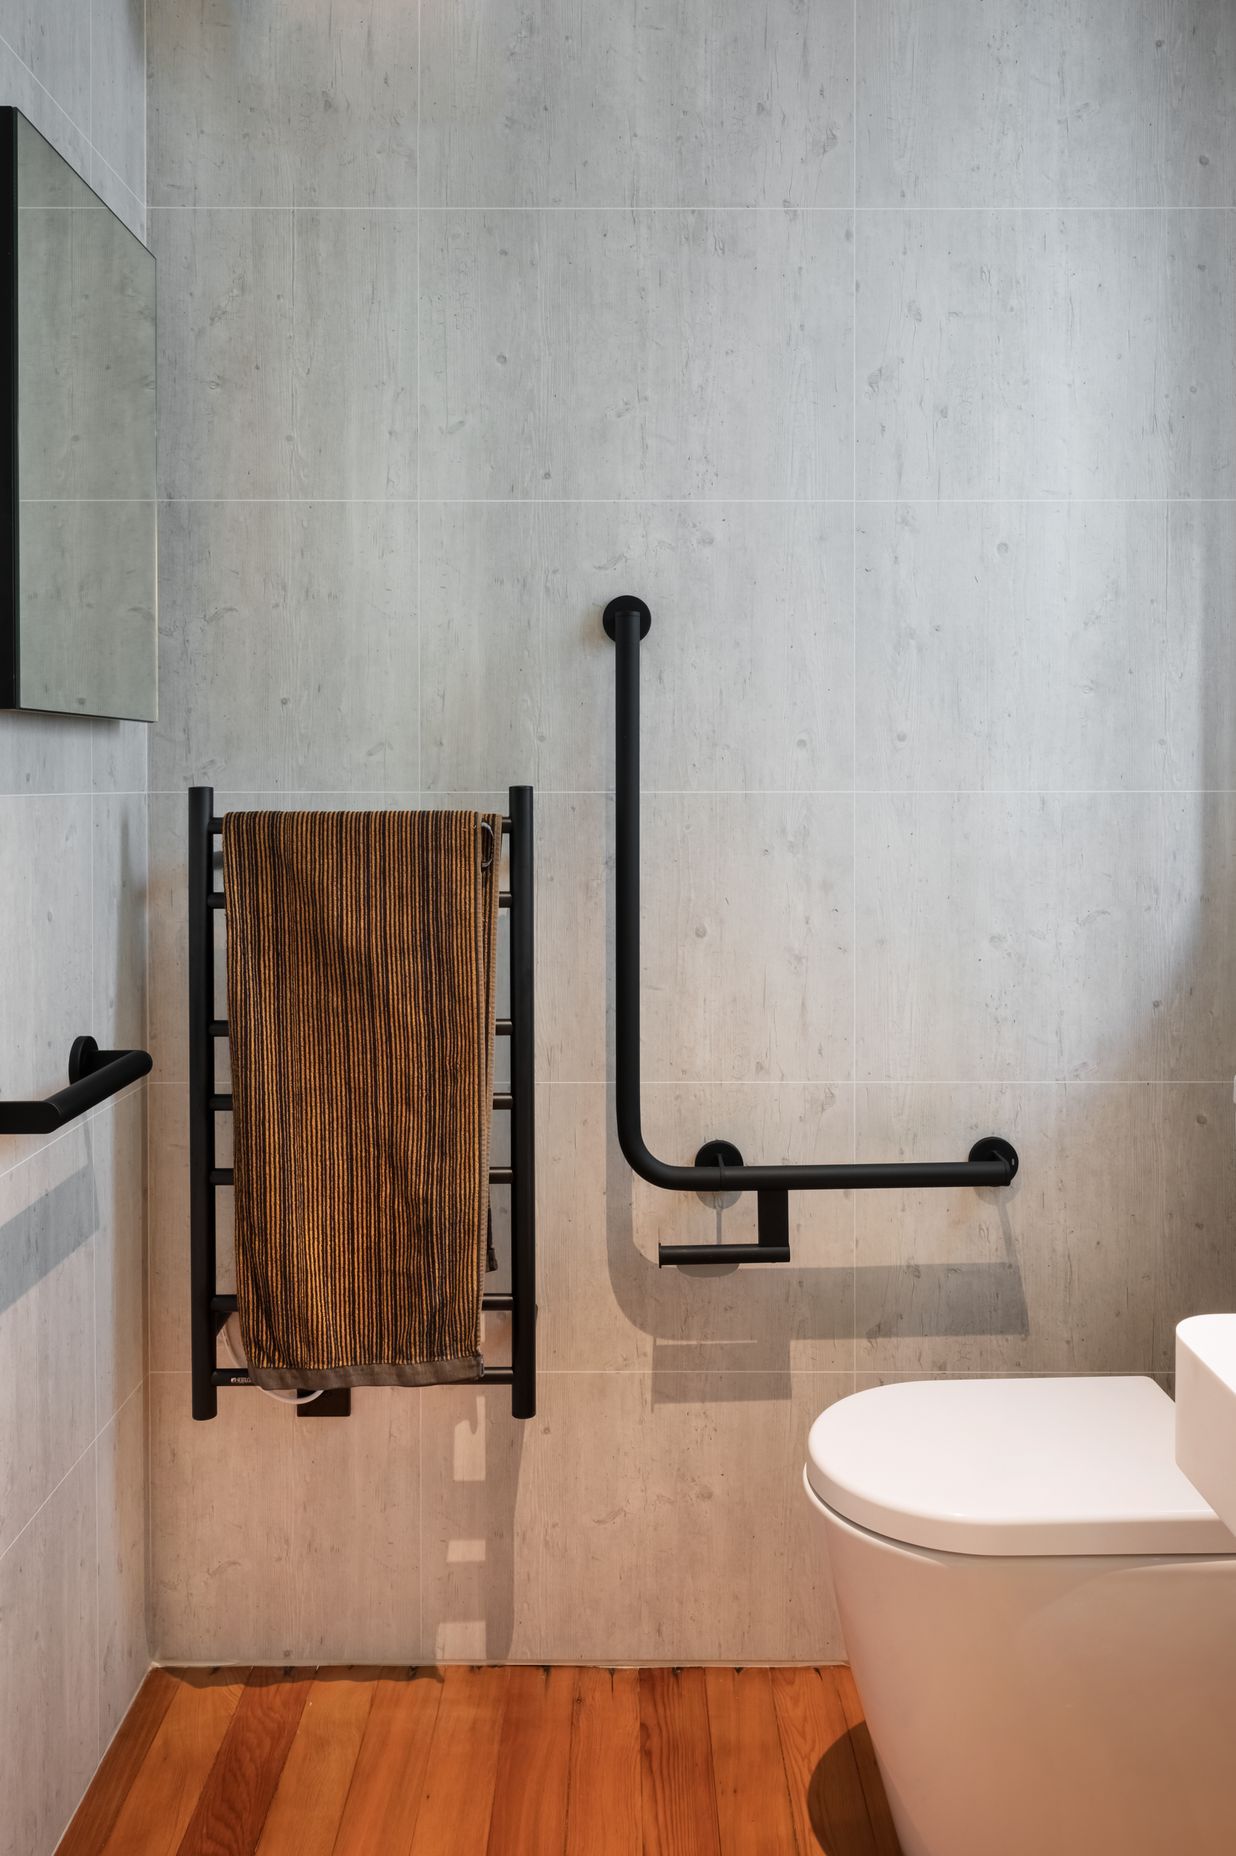 Renovated bathroom using stylish accessible fittings